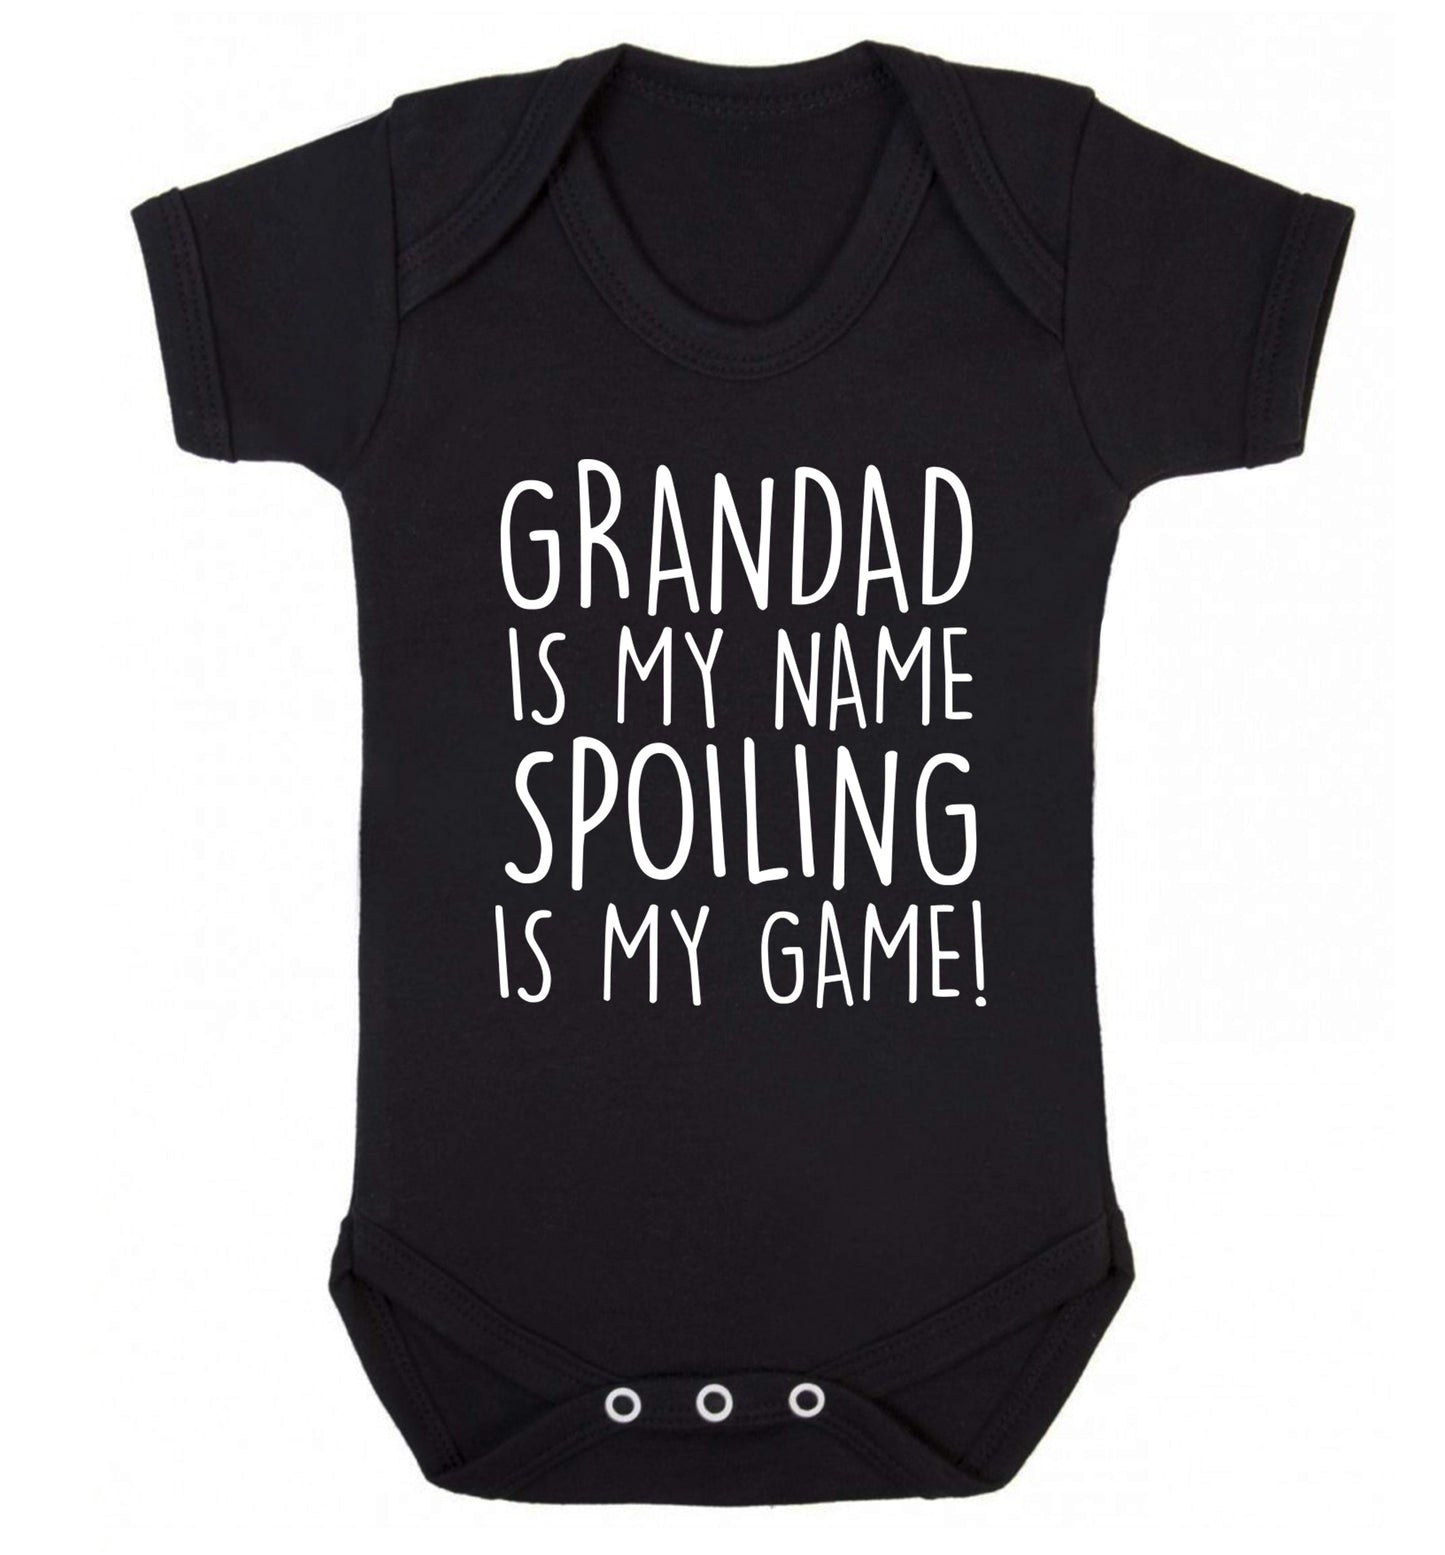 Grandad is my name, spoiling is my game Baby Vest black 18-24 months